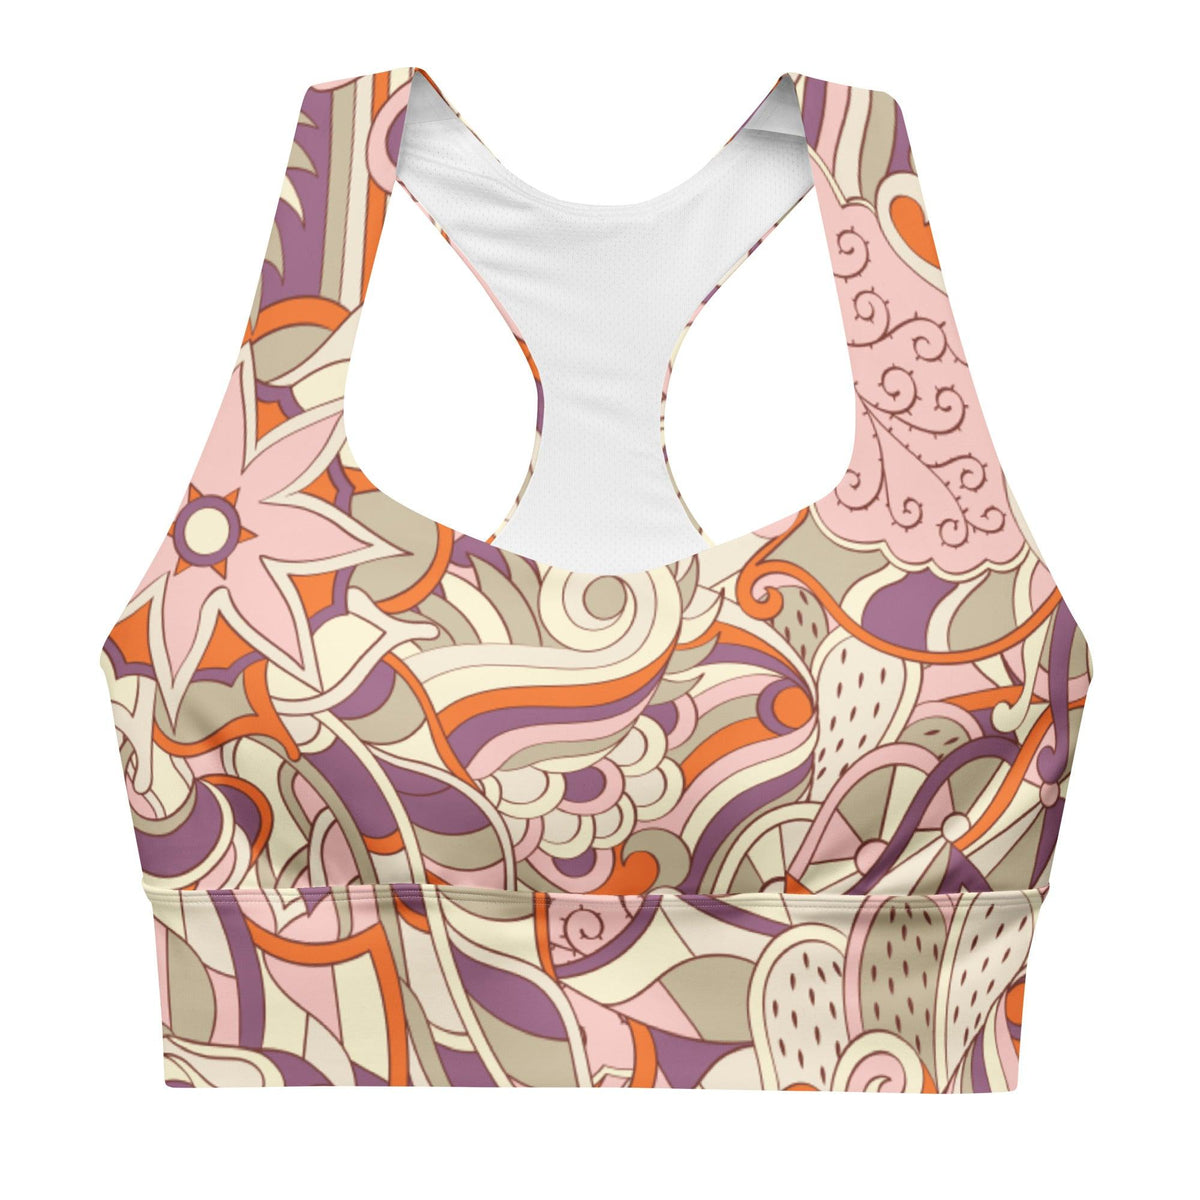 Amai Longline Sports Bra - Abstract All Over Psychedelic Kaleidoscope Paisley Print - Pink Orange - Padded - Women's Activewear